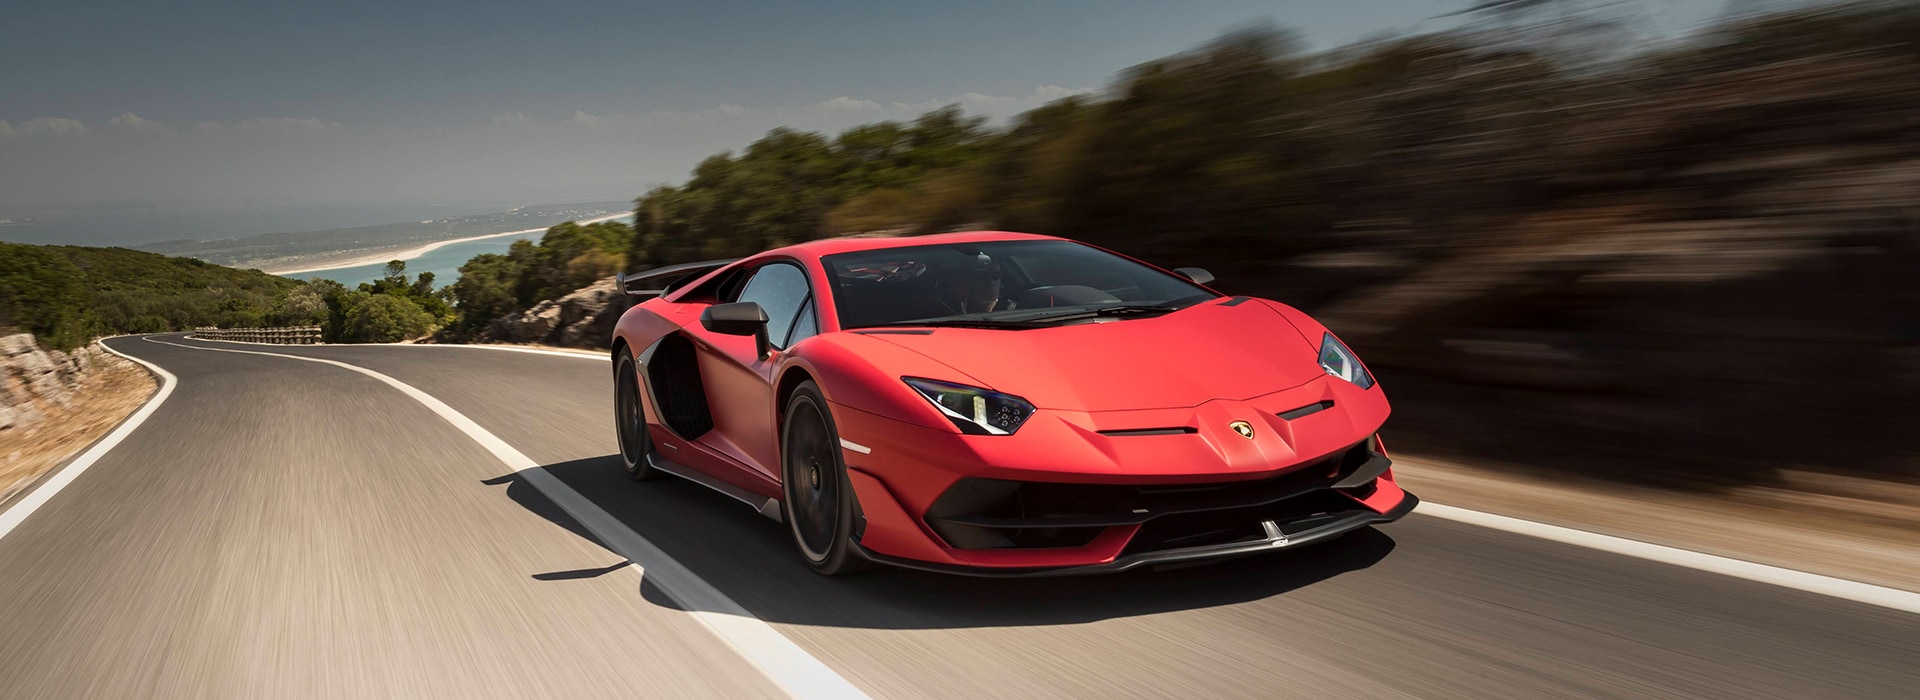 Unleash the Speed: Top 10 High-Performance Cars for Thrill-Seekers - Lamborghini Aventador SVJ: Power and precision